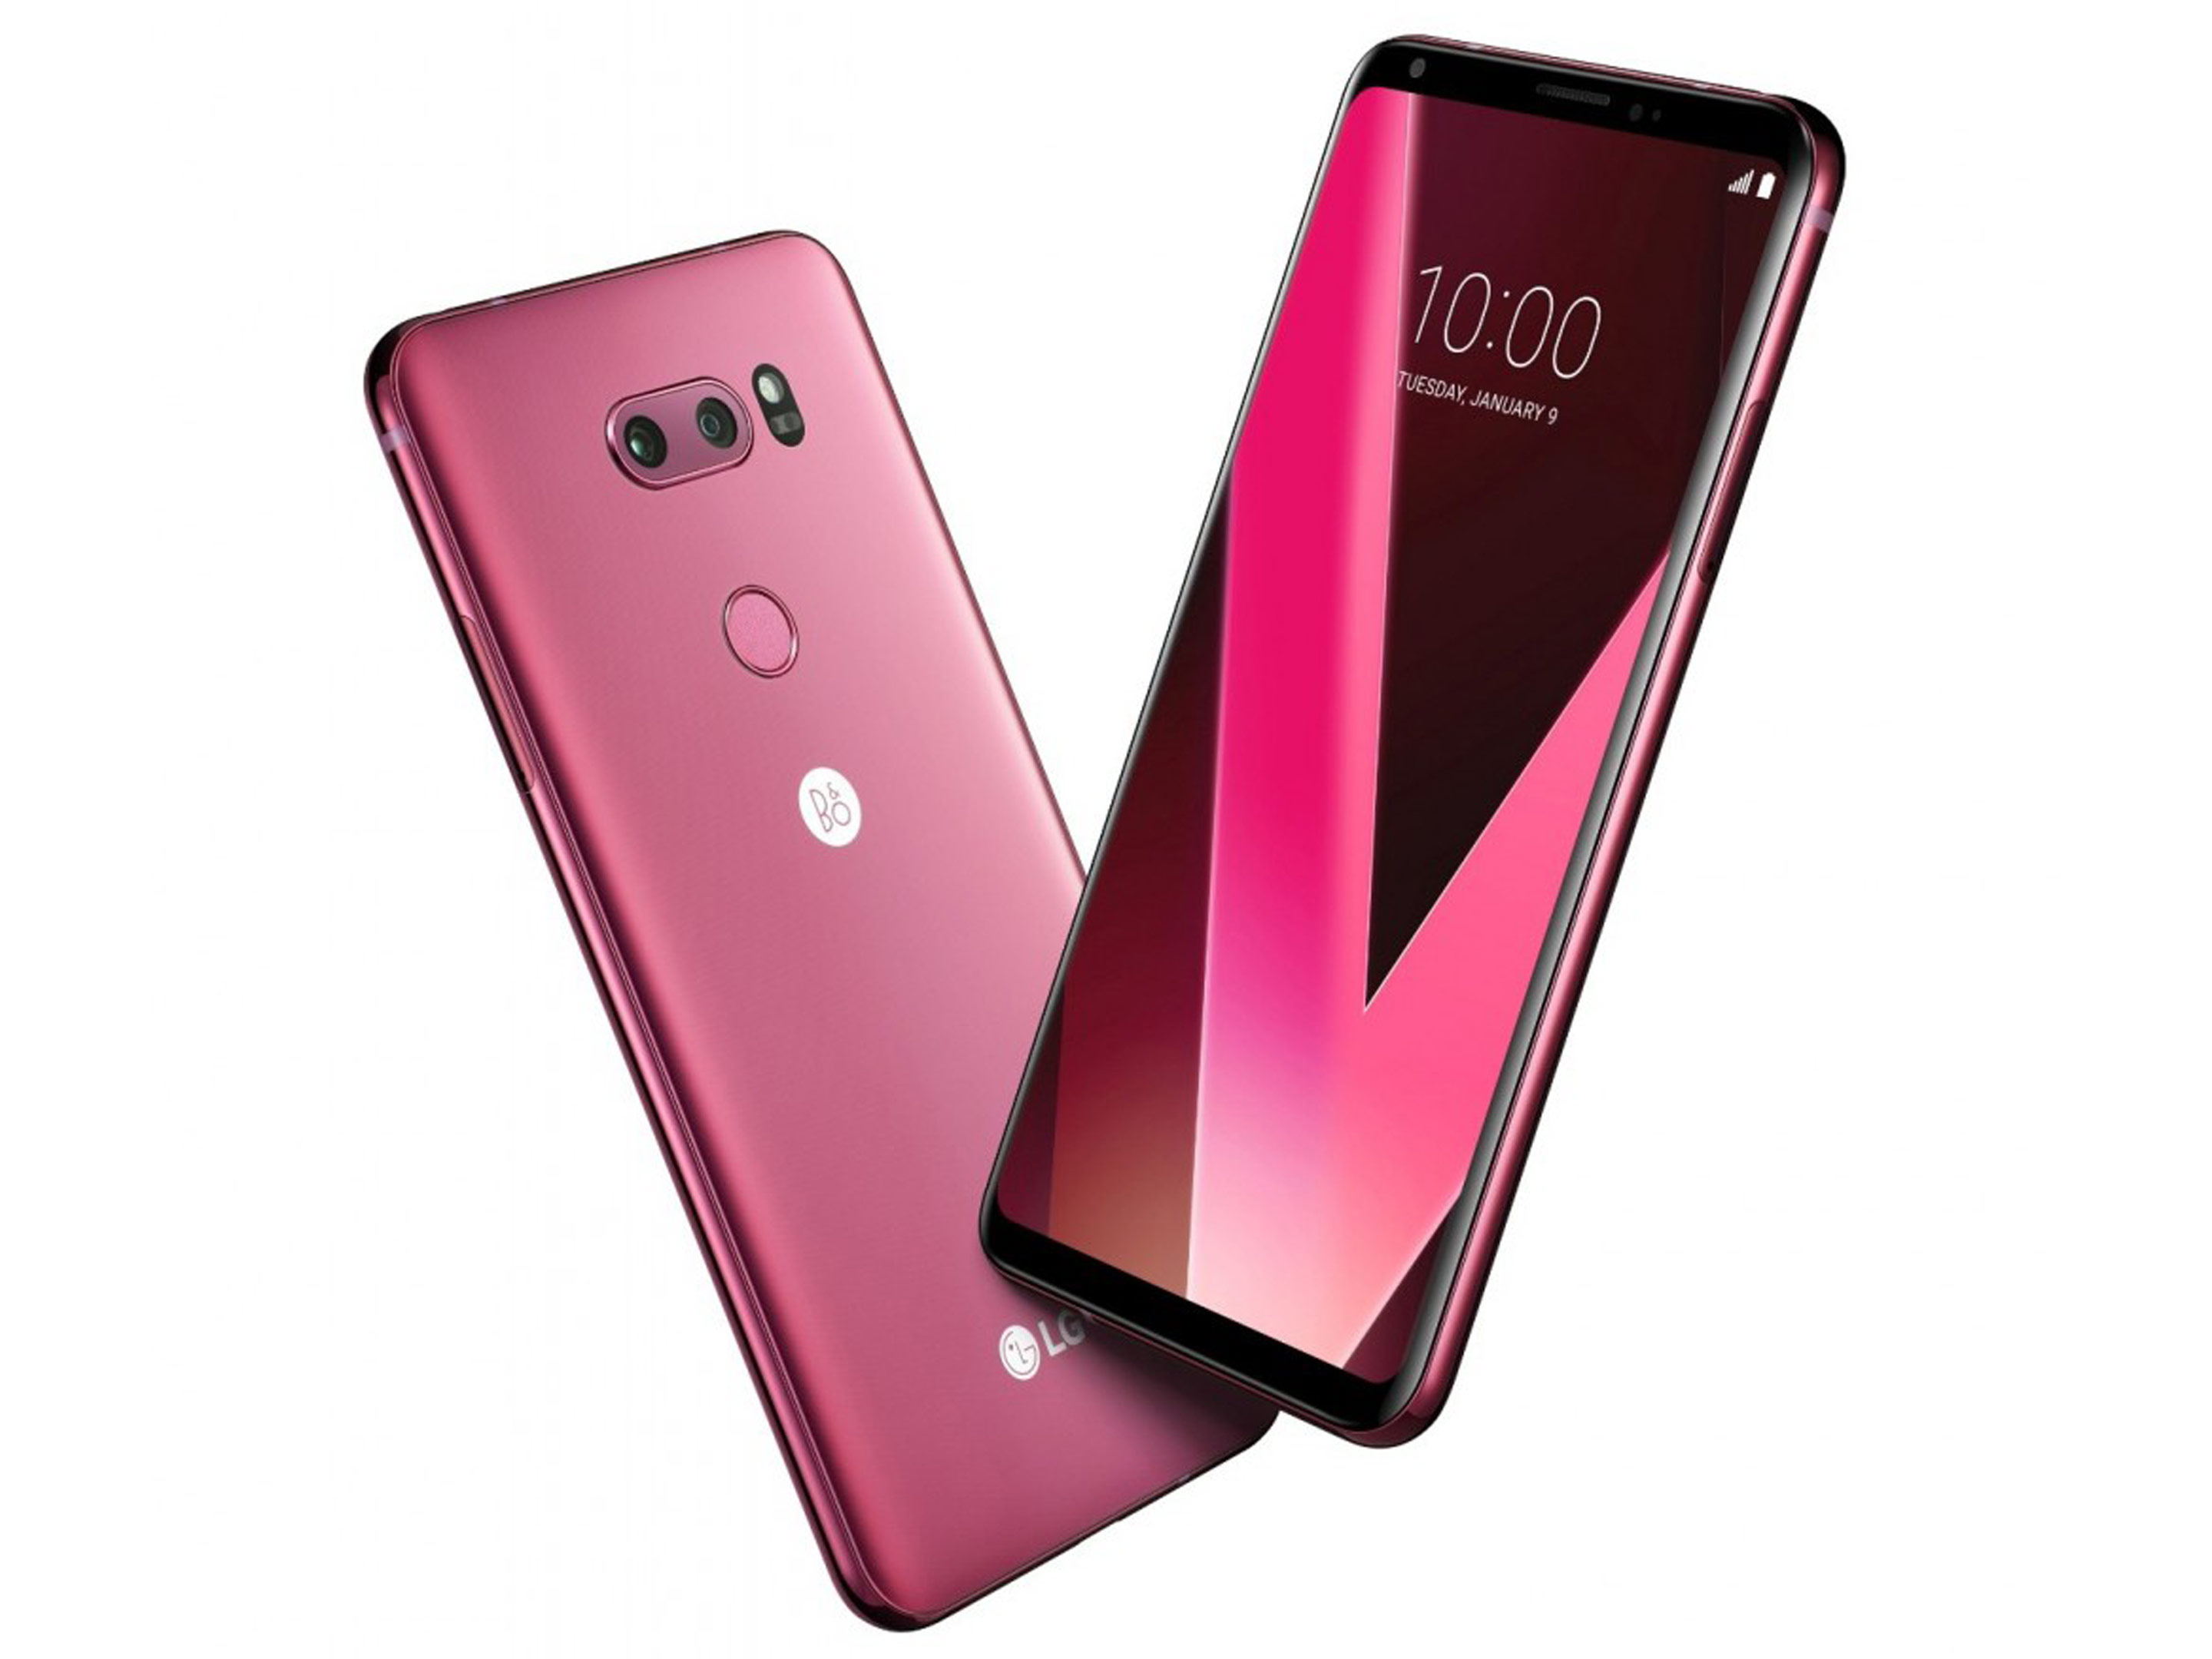 LG V30 in raspberry rose, front and back